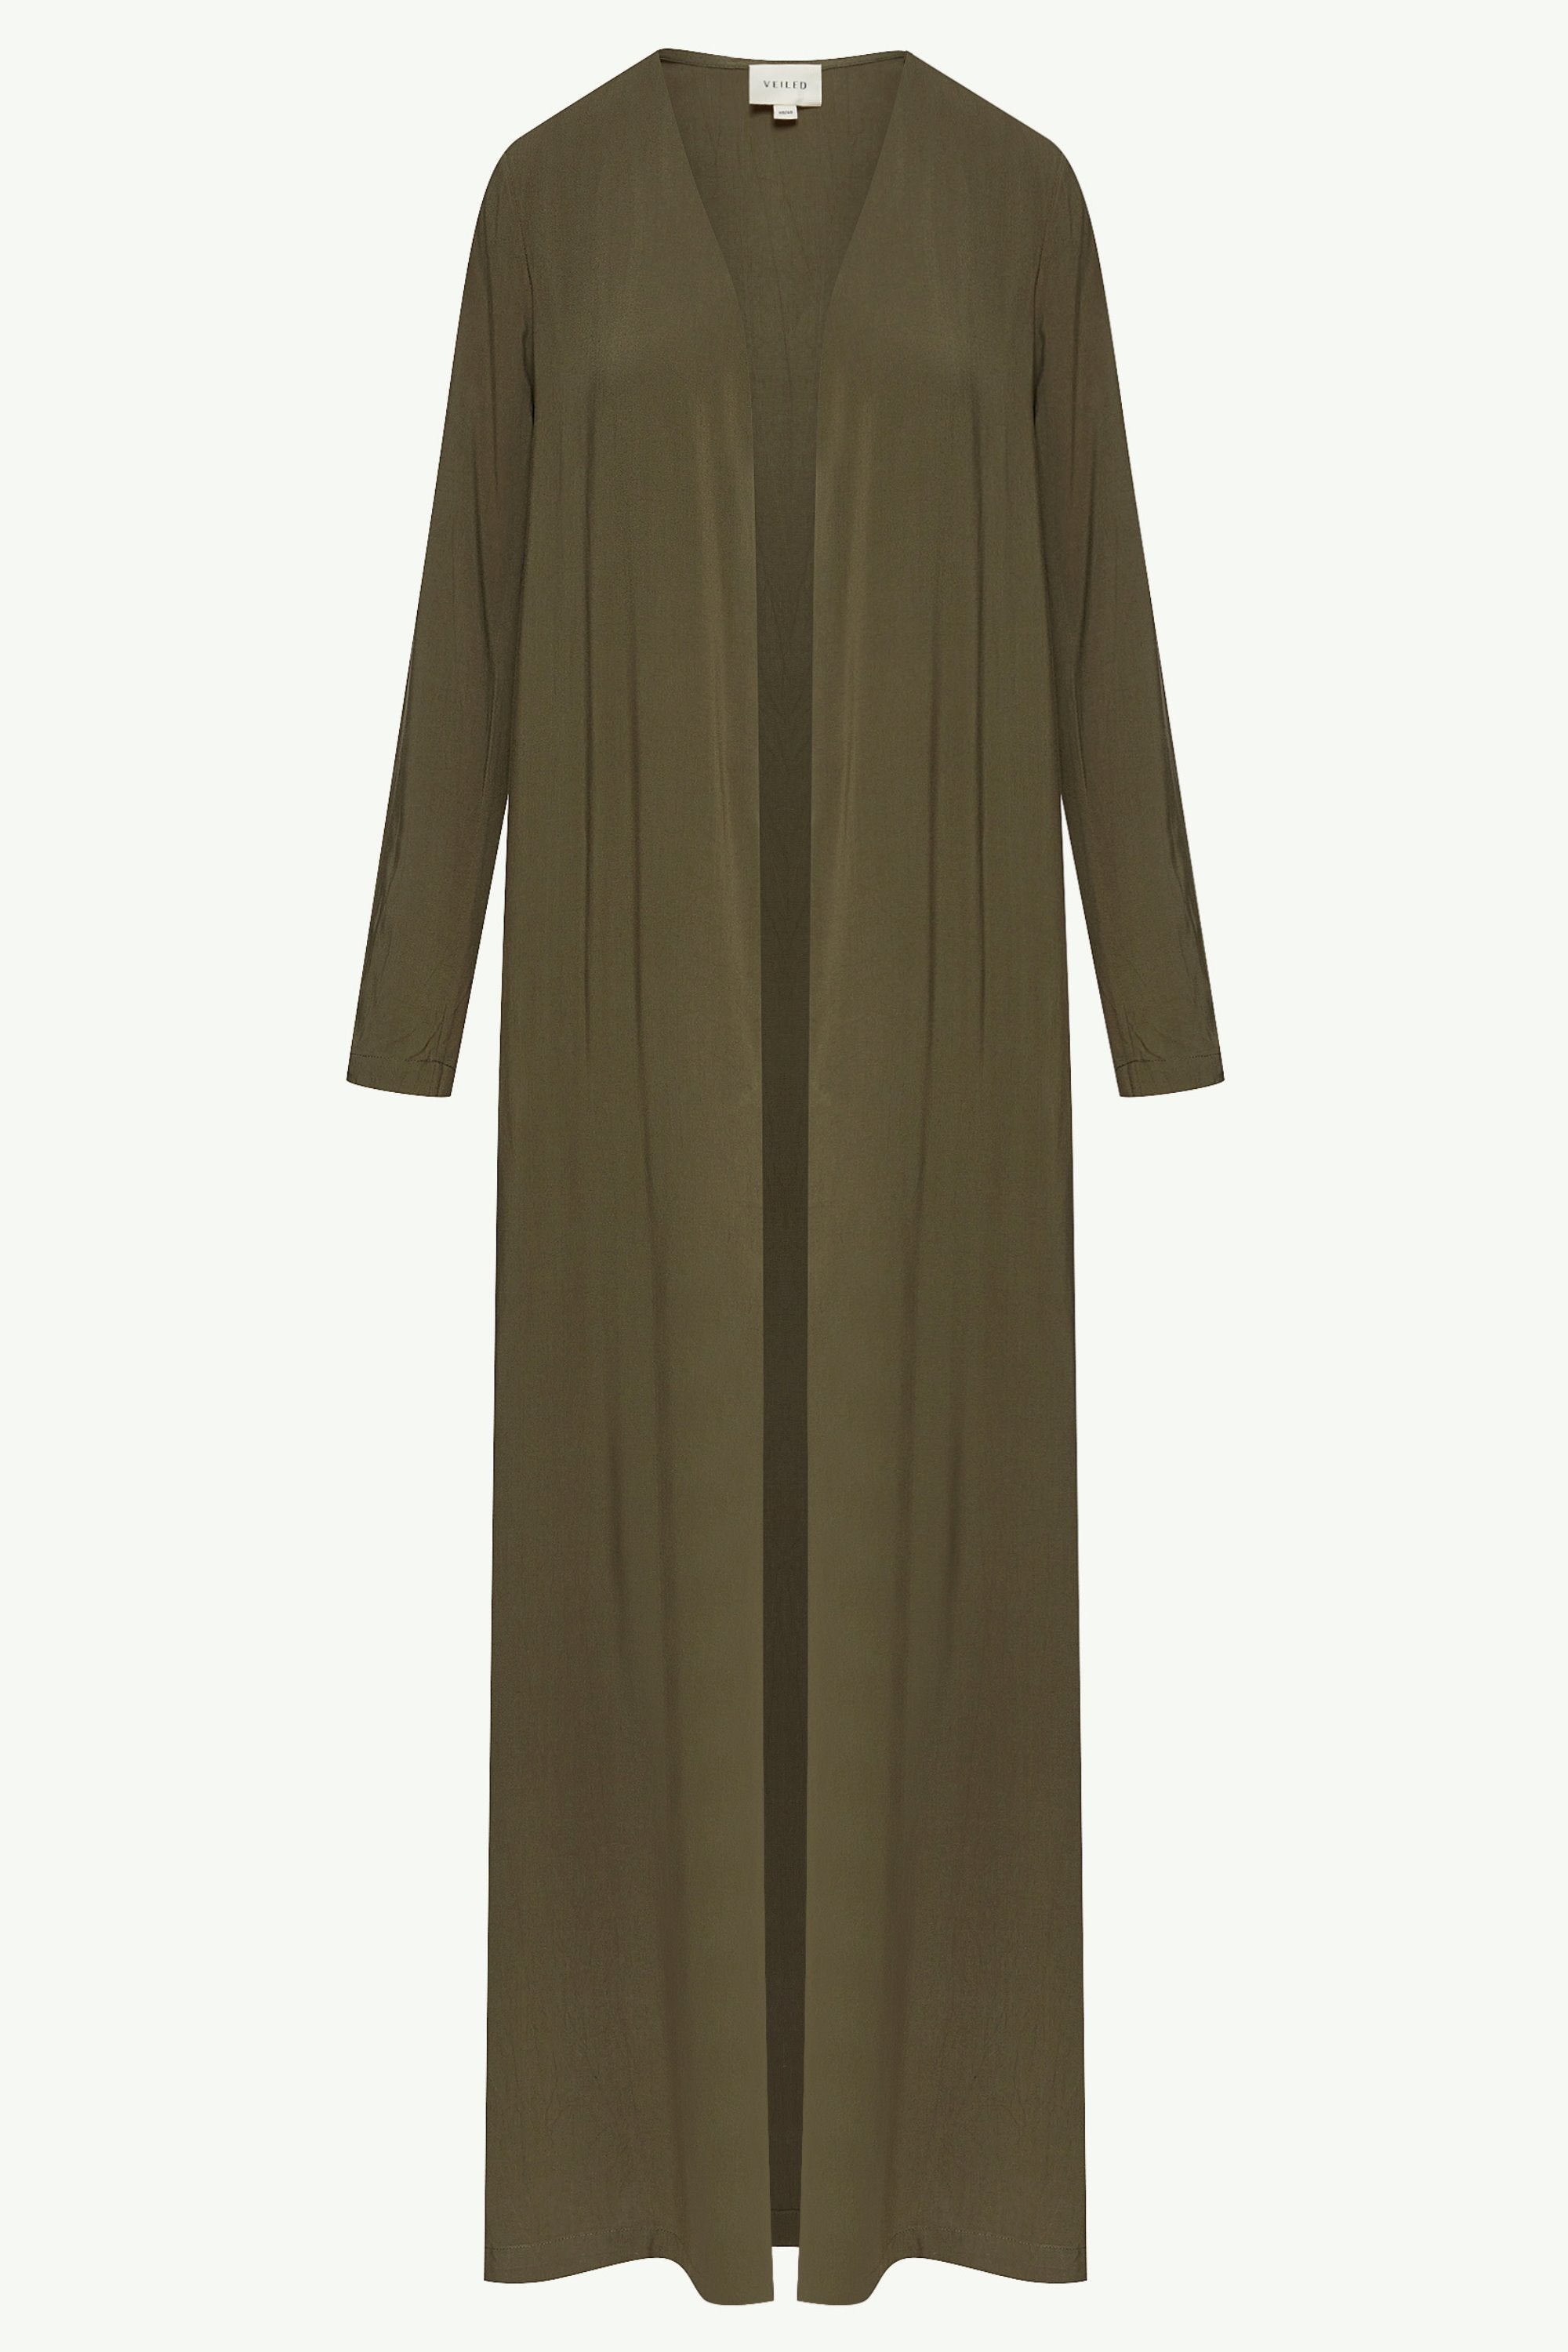 Essential Woven Open Abaya - Olive Clothing epschoolboard 